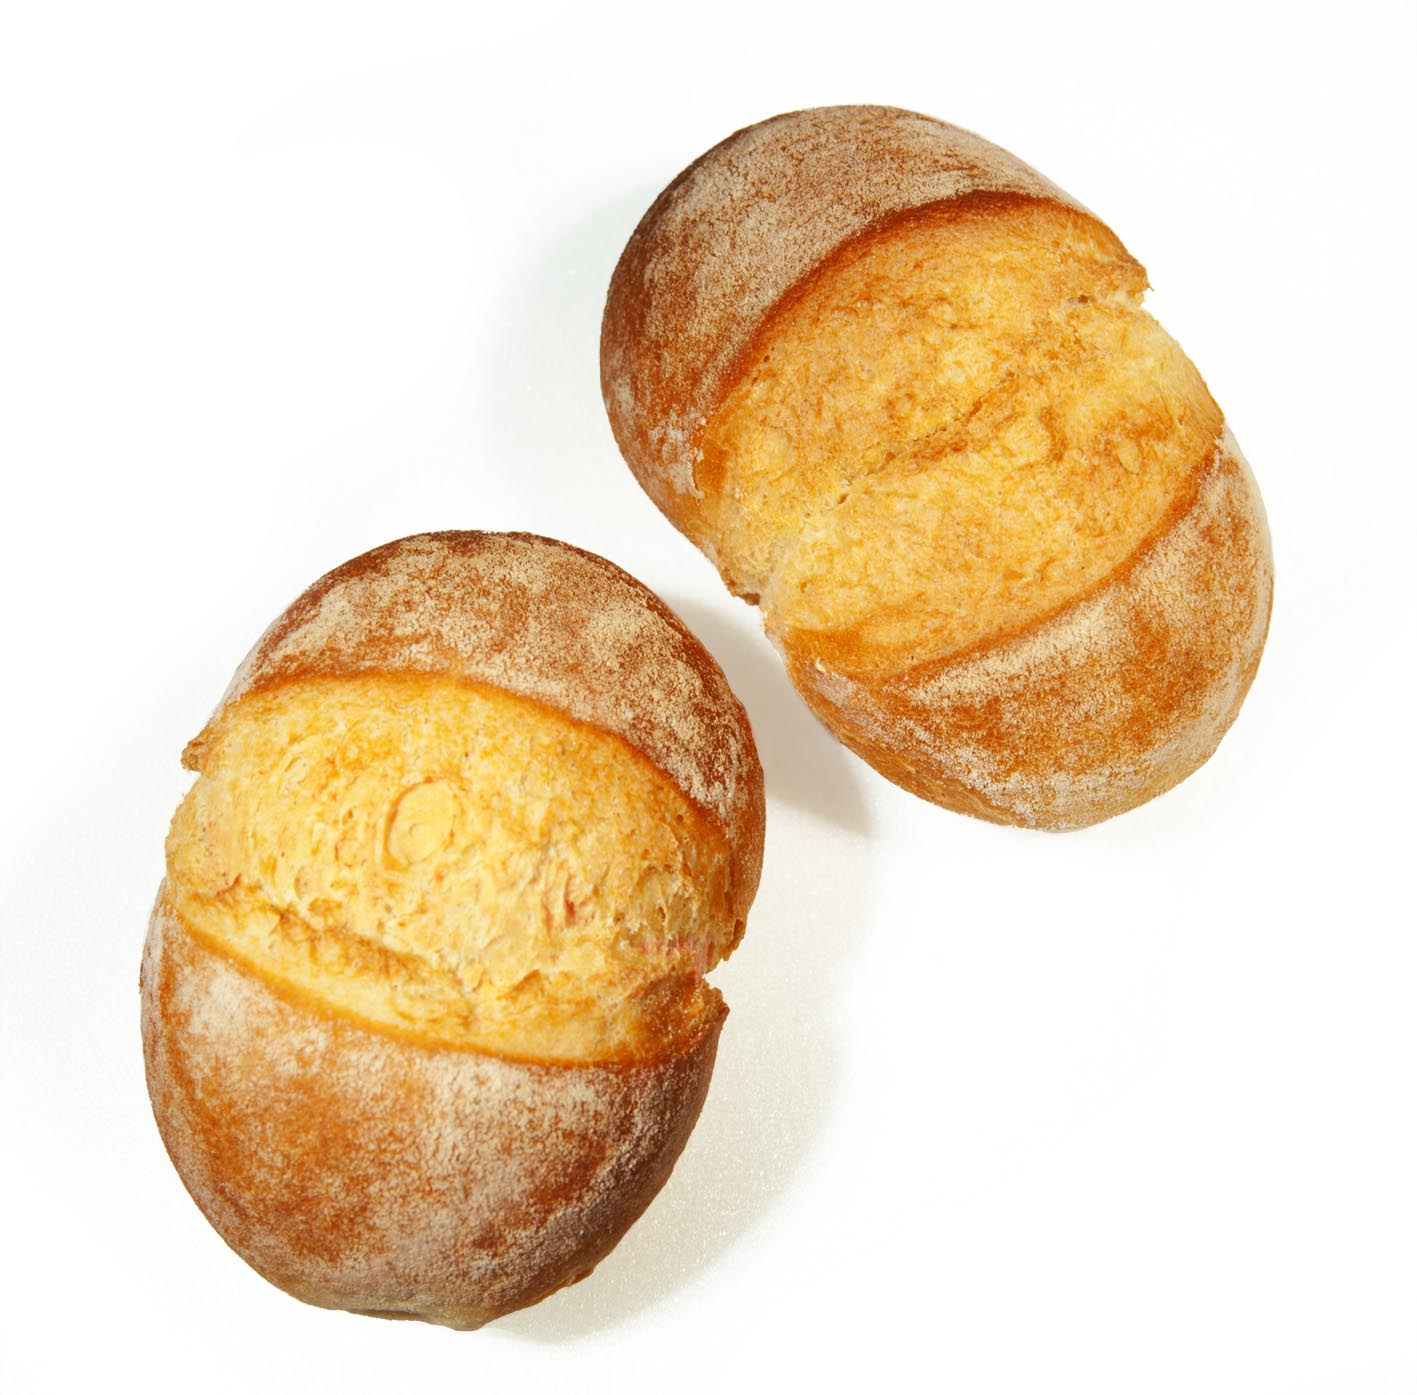 FROZEN SPACCATINA BREAD ROLL WITH DURUM WHEAT SEMOLINA  50G, BAKERY&CEREAL/BAKED, Italy, OROPAN S.p.A.